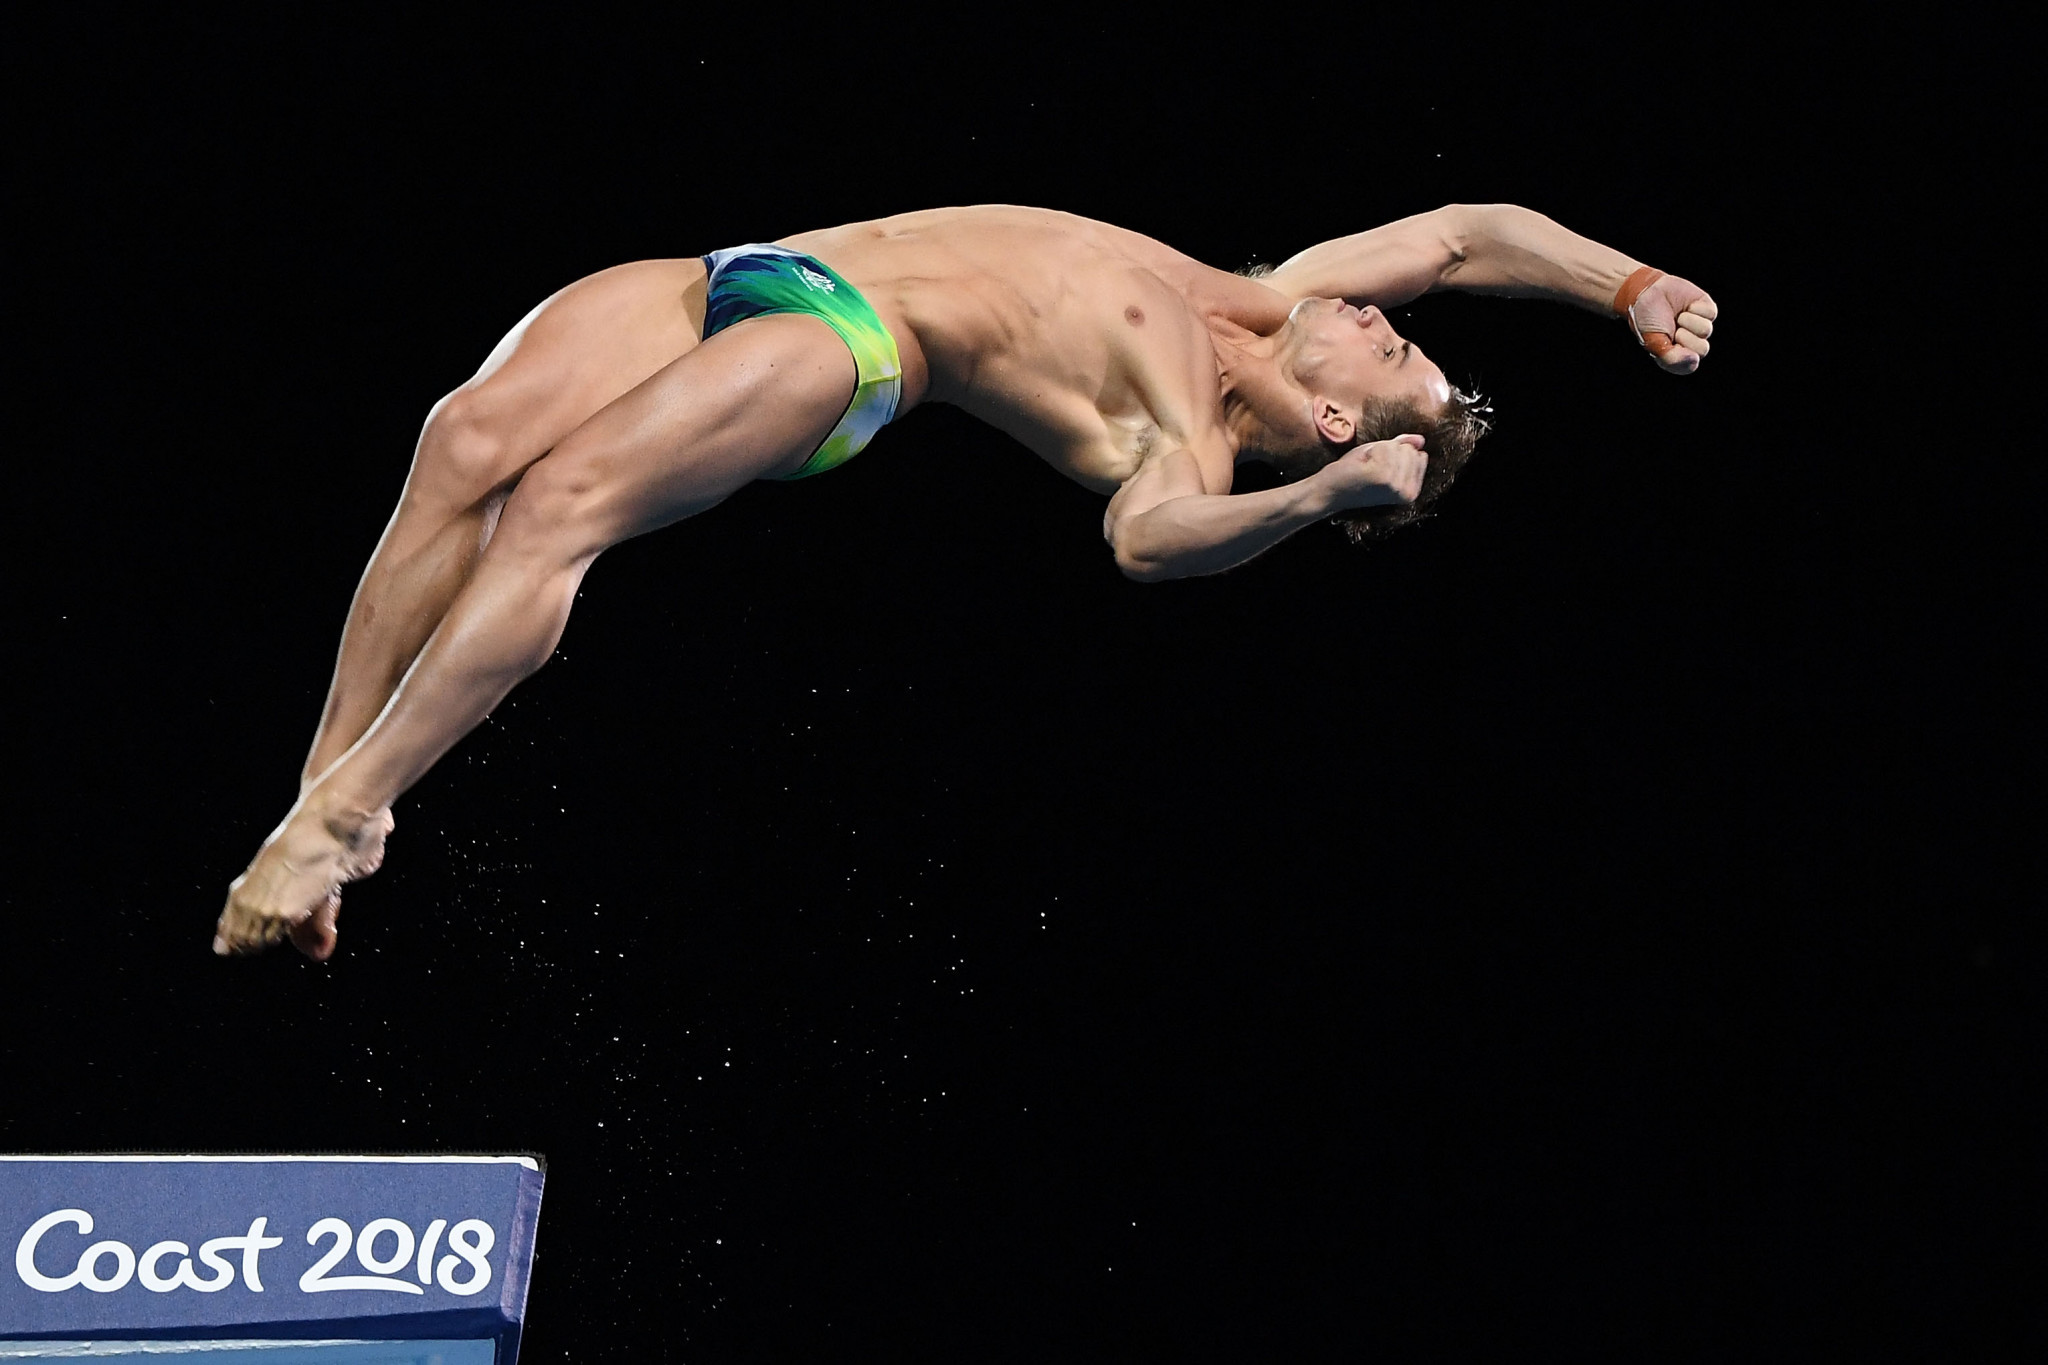 There was also success for the host nation in the men's 10 metres platform as Domonic Bedggood won the last diving event of Gold Coast 2018
©Getty Images